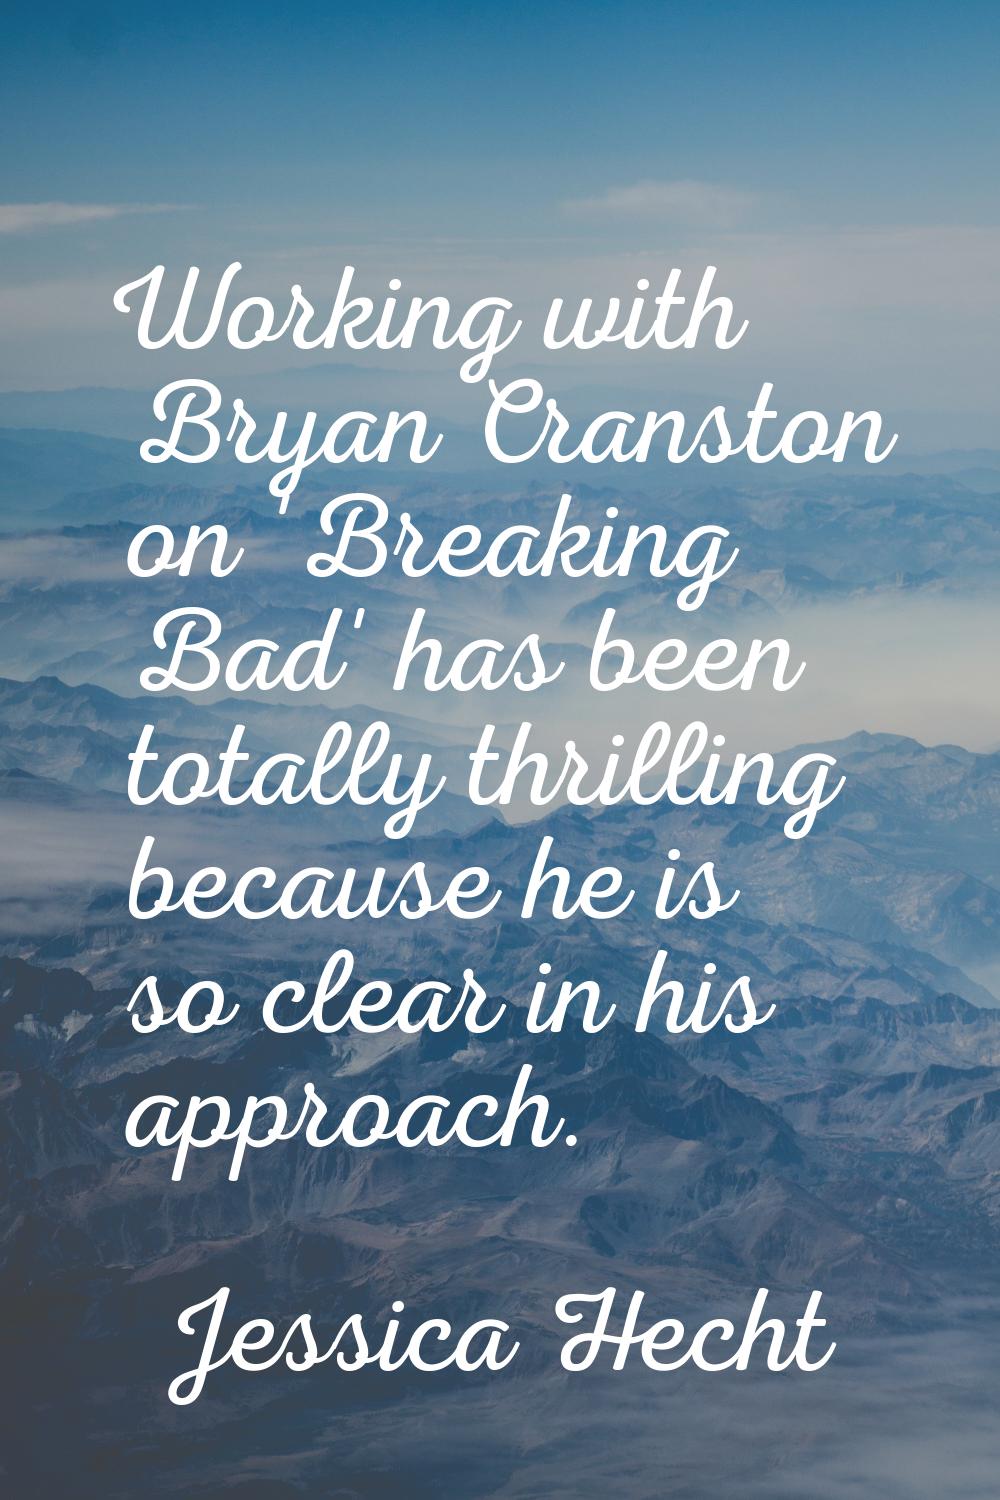 Working with Bryan Cranston on 'Breaking Bad' has been totally thrilling because he is so clear in 